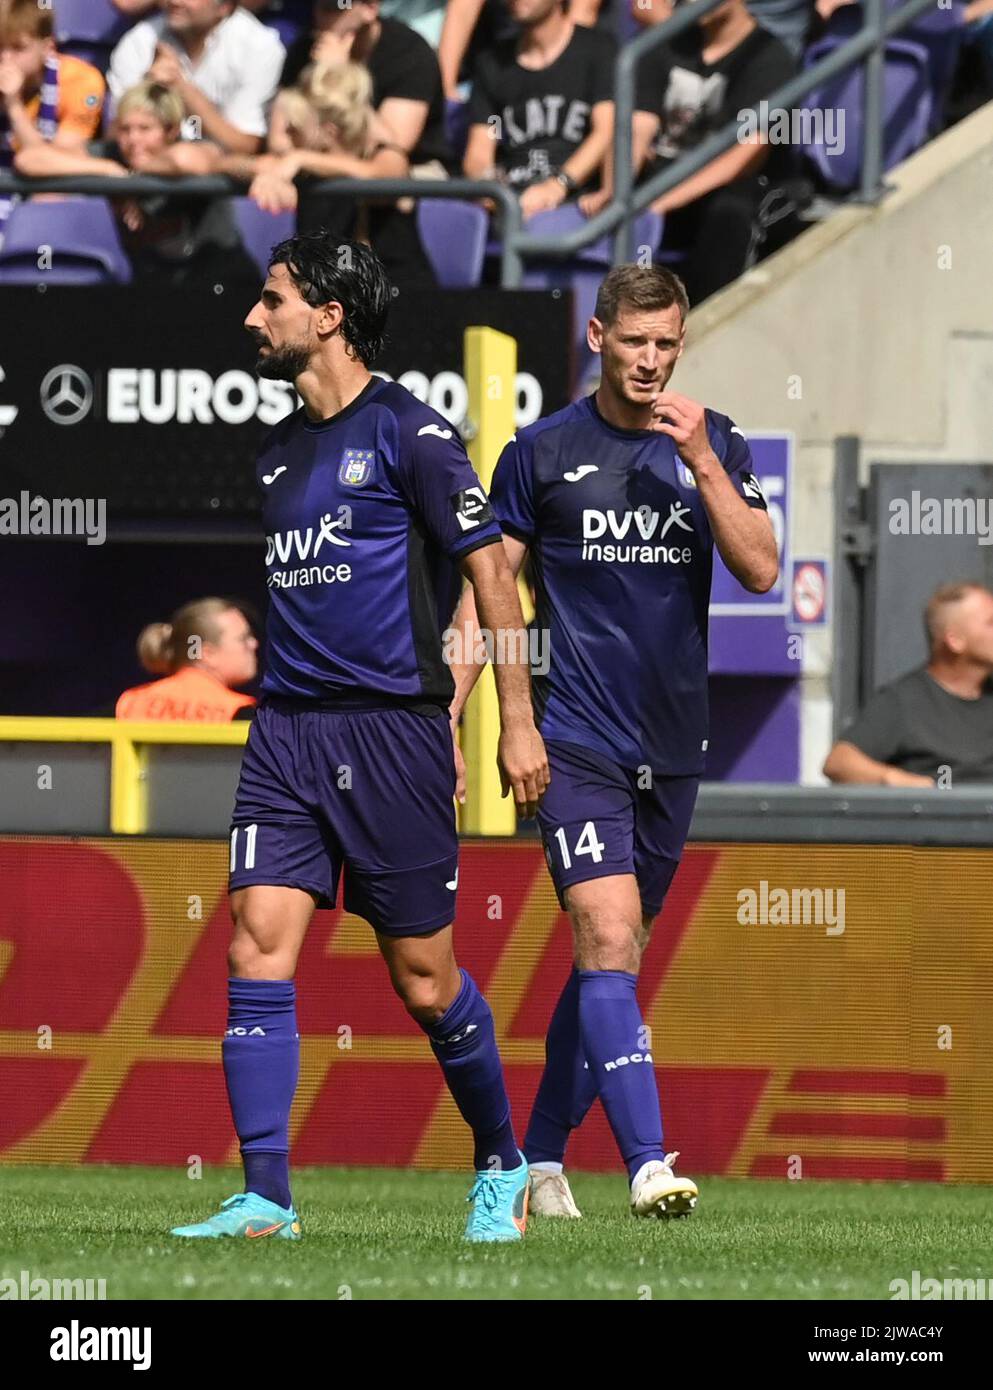 Anderlecht's Jan Vertonghen reacts during a soccer match between RSCA Anderlecht and OH Leuven, Sunday 04 September 2022 in Anderlecht, on day 7 of the 2022-2023 'Jupiler Pro League' first division of the Belgian championship. BELGA PHOTO JOHN THYS Stock Photo